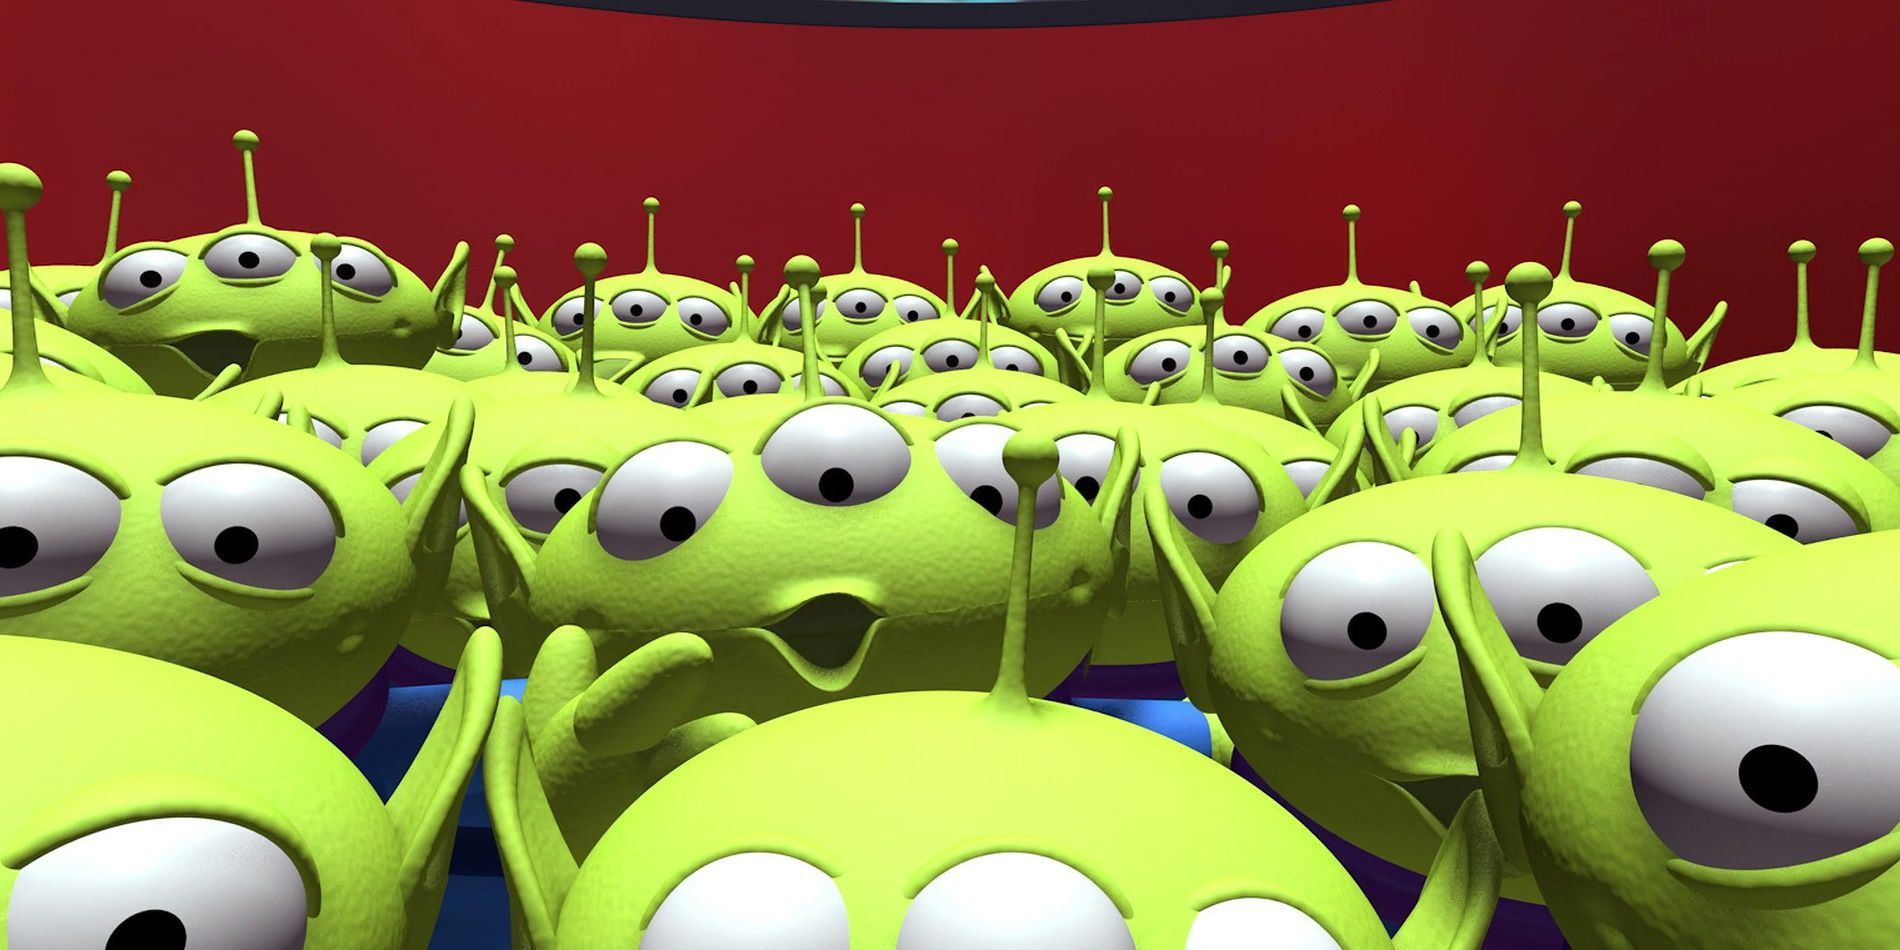 Aliens in the claw machine in Toy Story